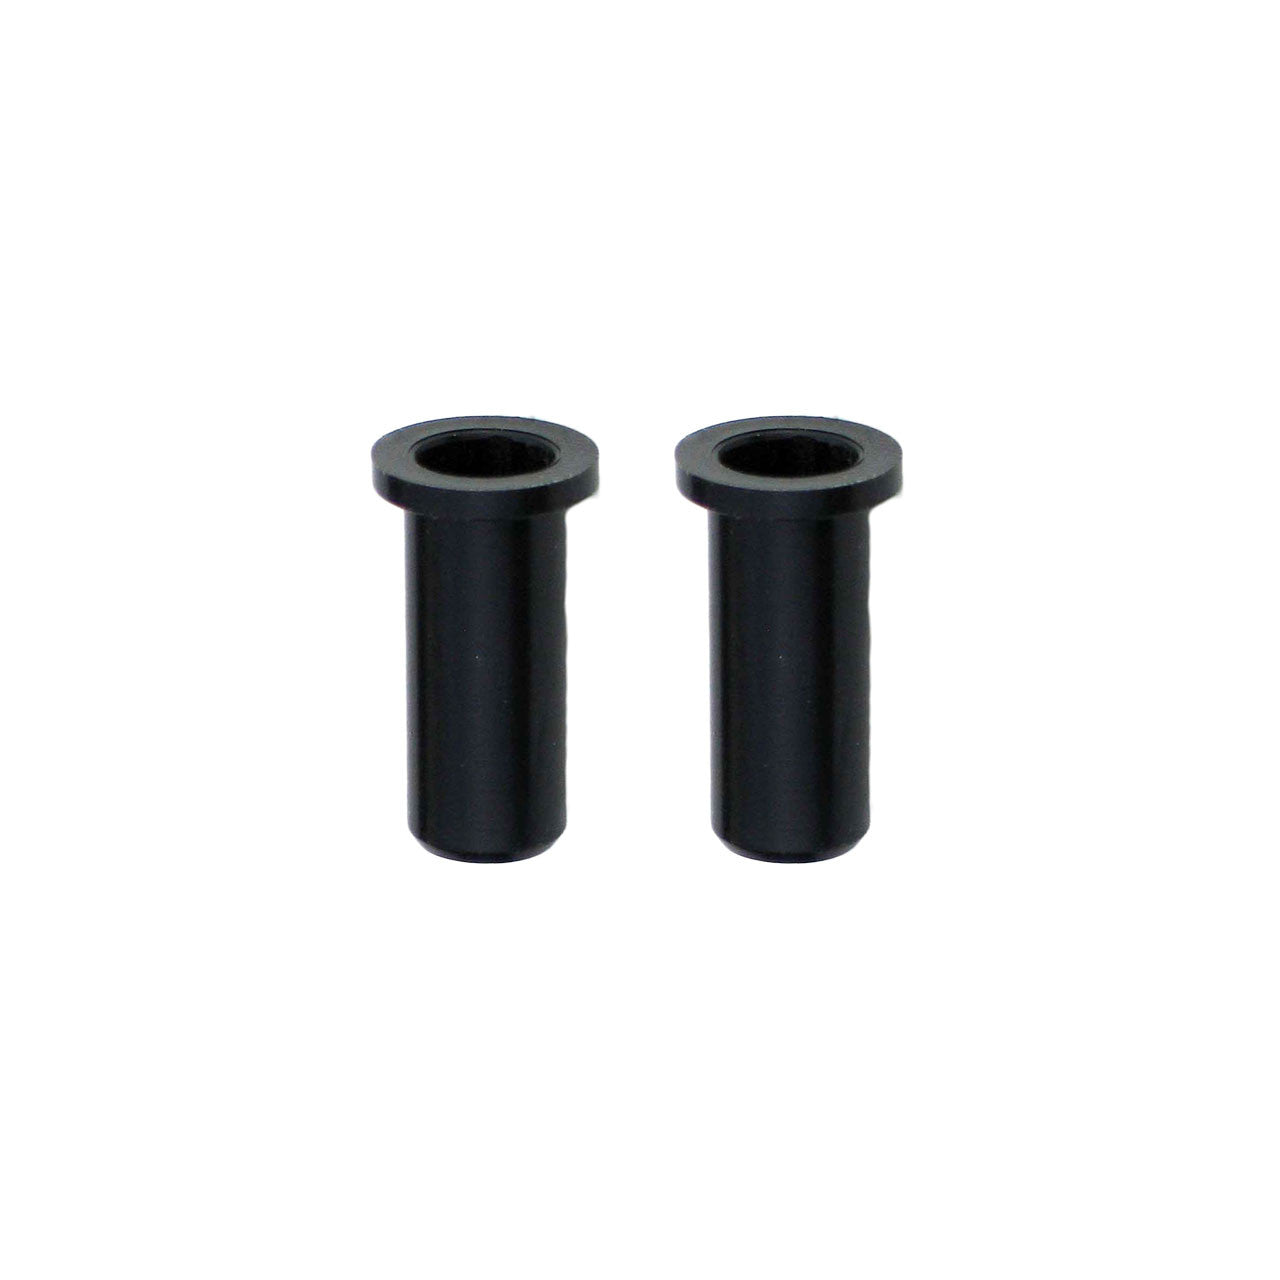 Two 1/2" Oar Tower Reducer Bushings (Pair) by Sawyer isolated on a white background.